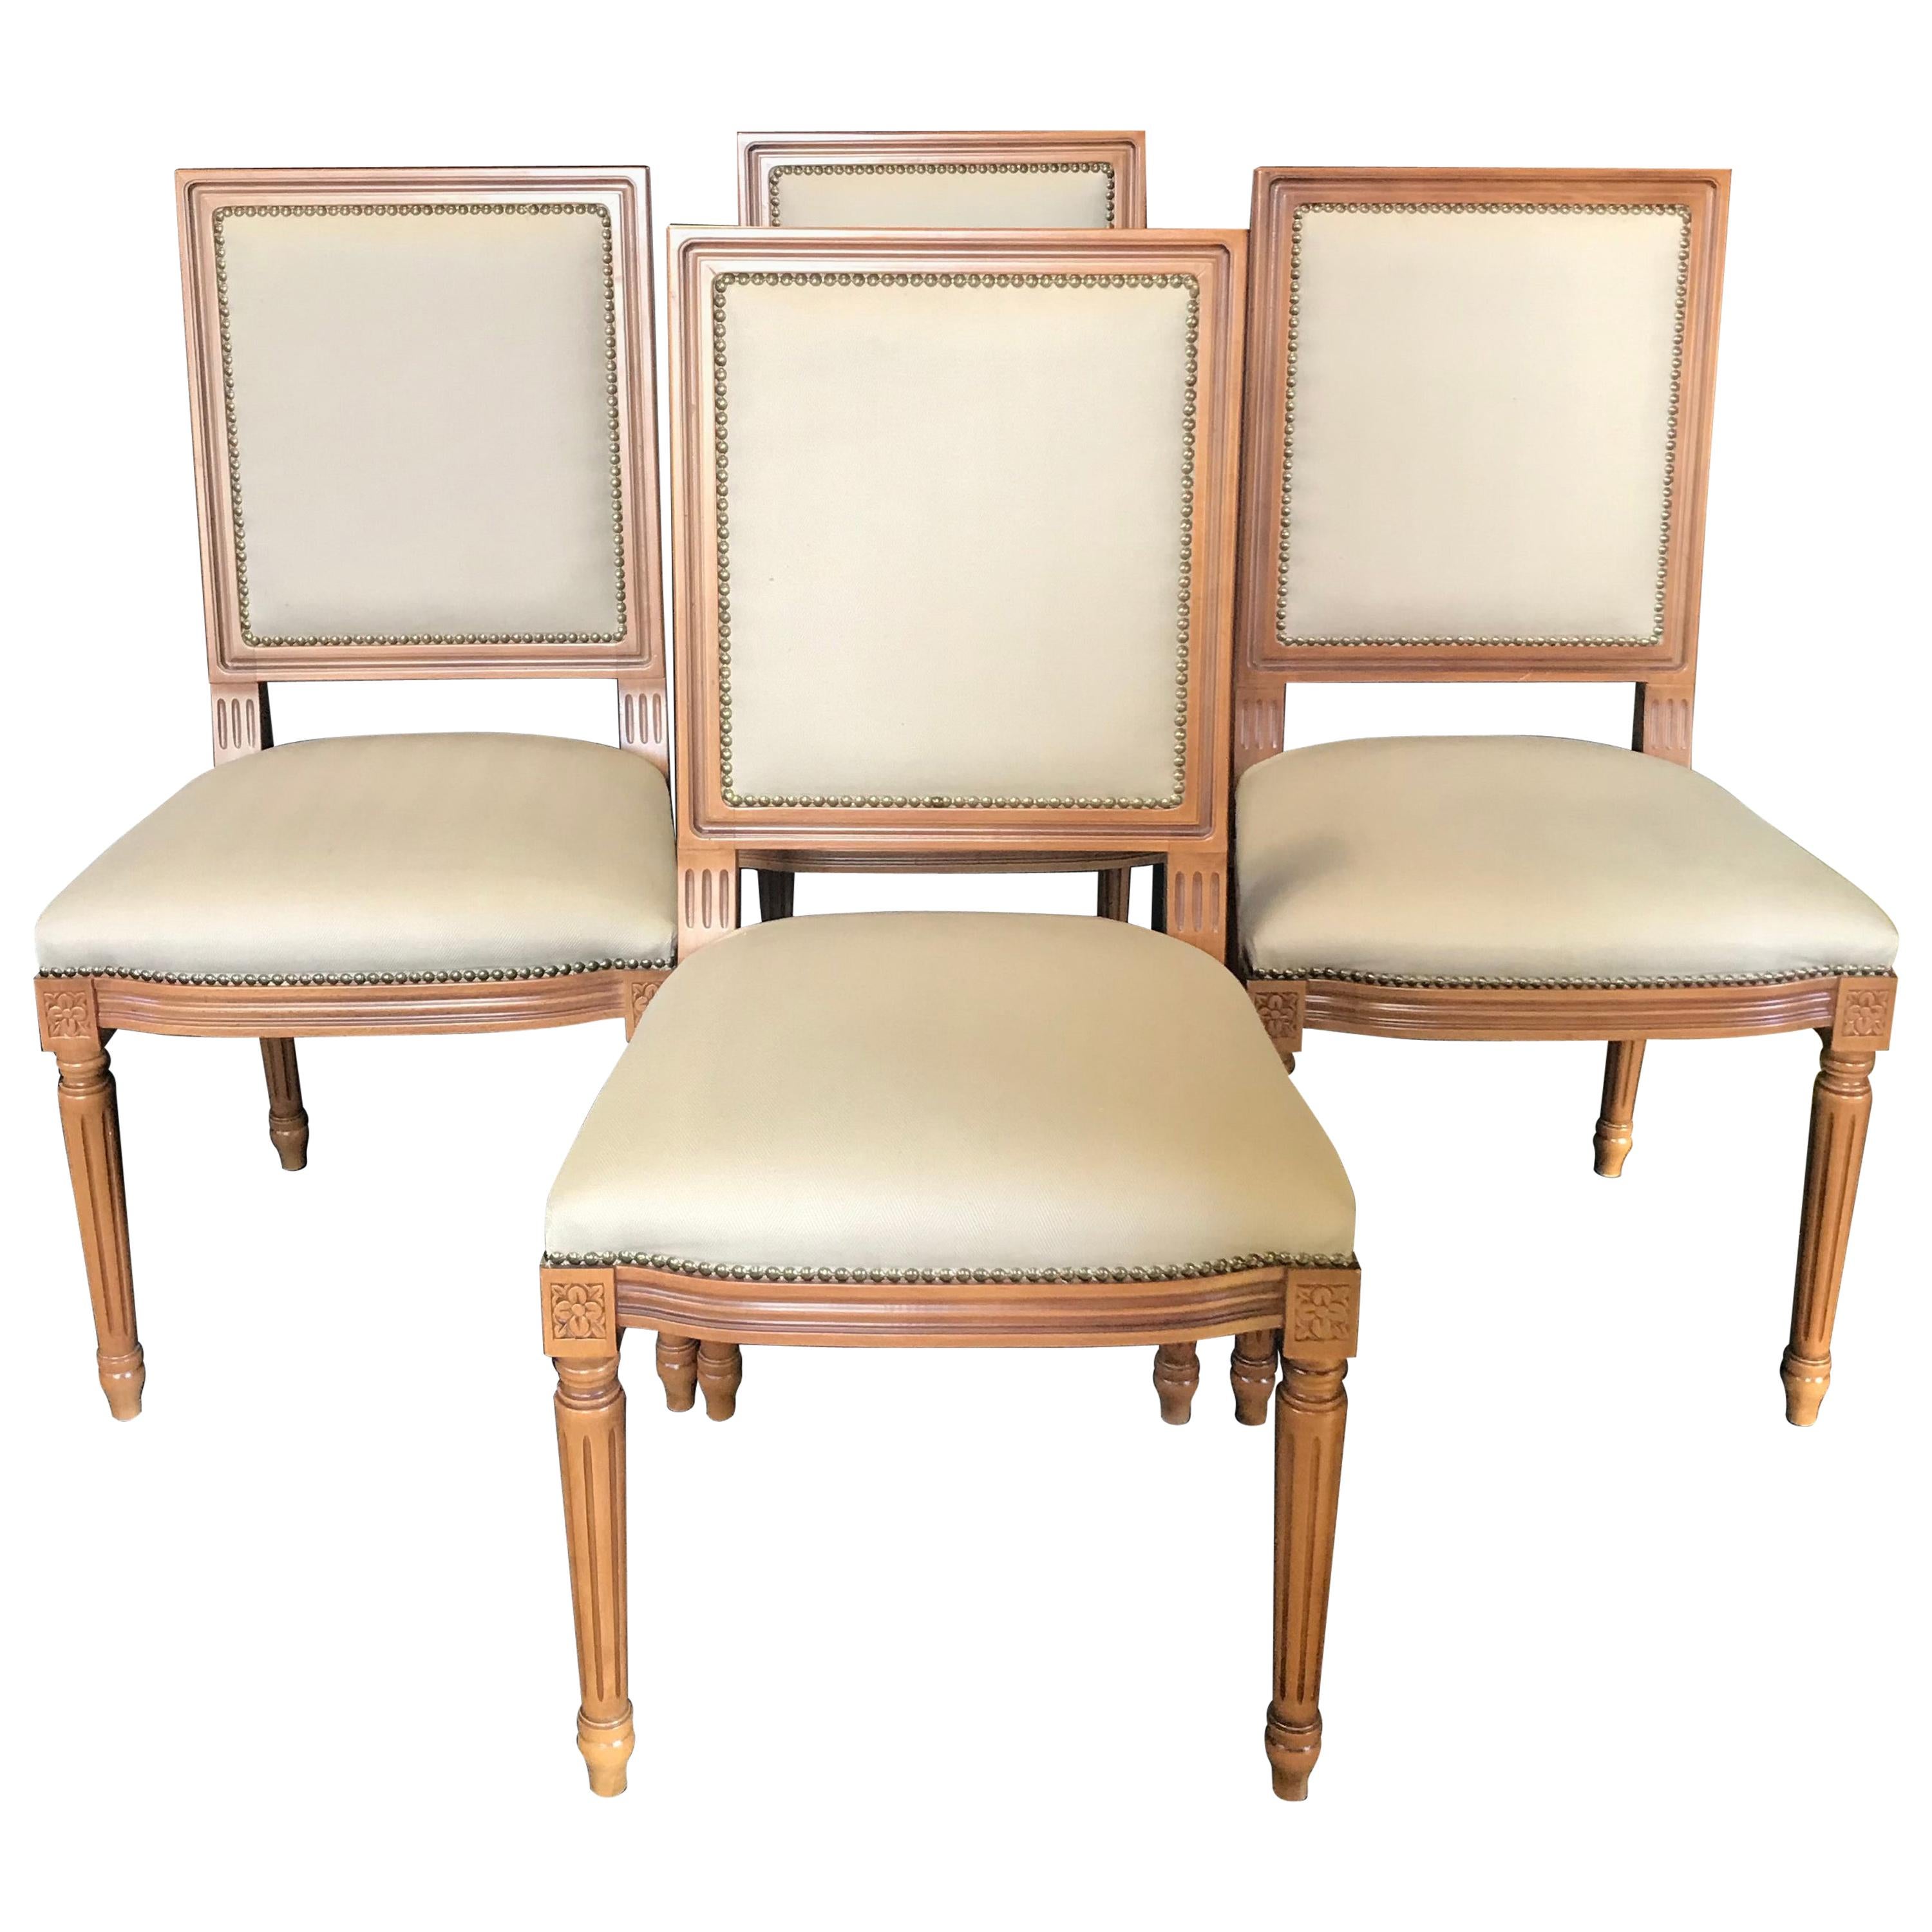 Elegant Set of Louis XVI Style Walnut and Upholstered Dining Chairs